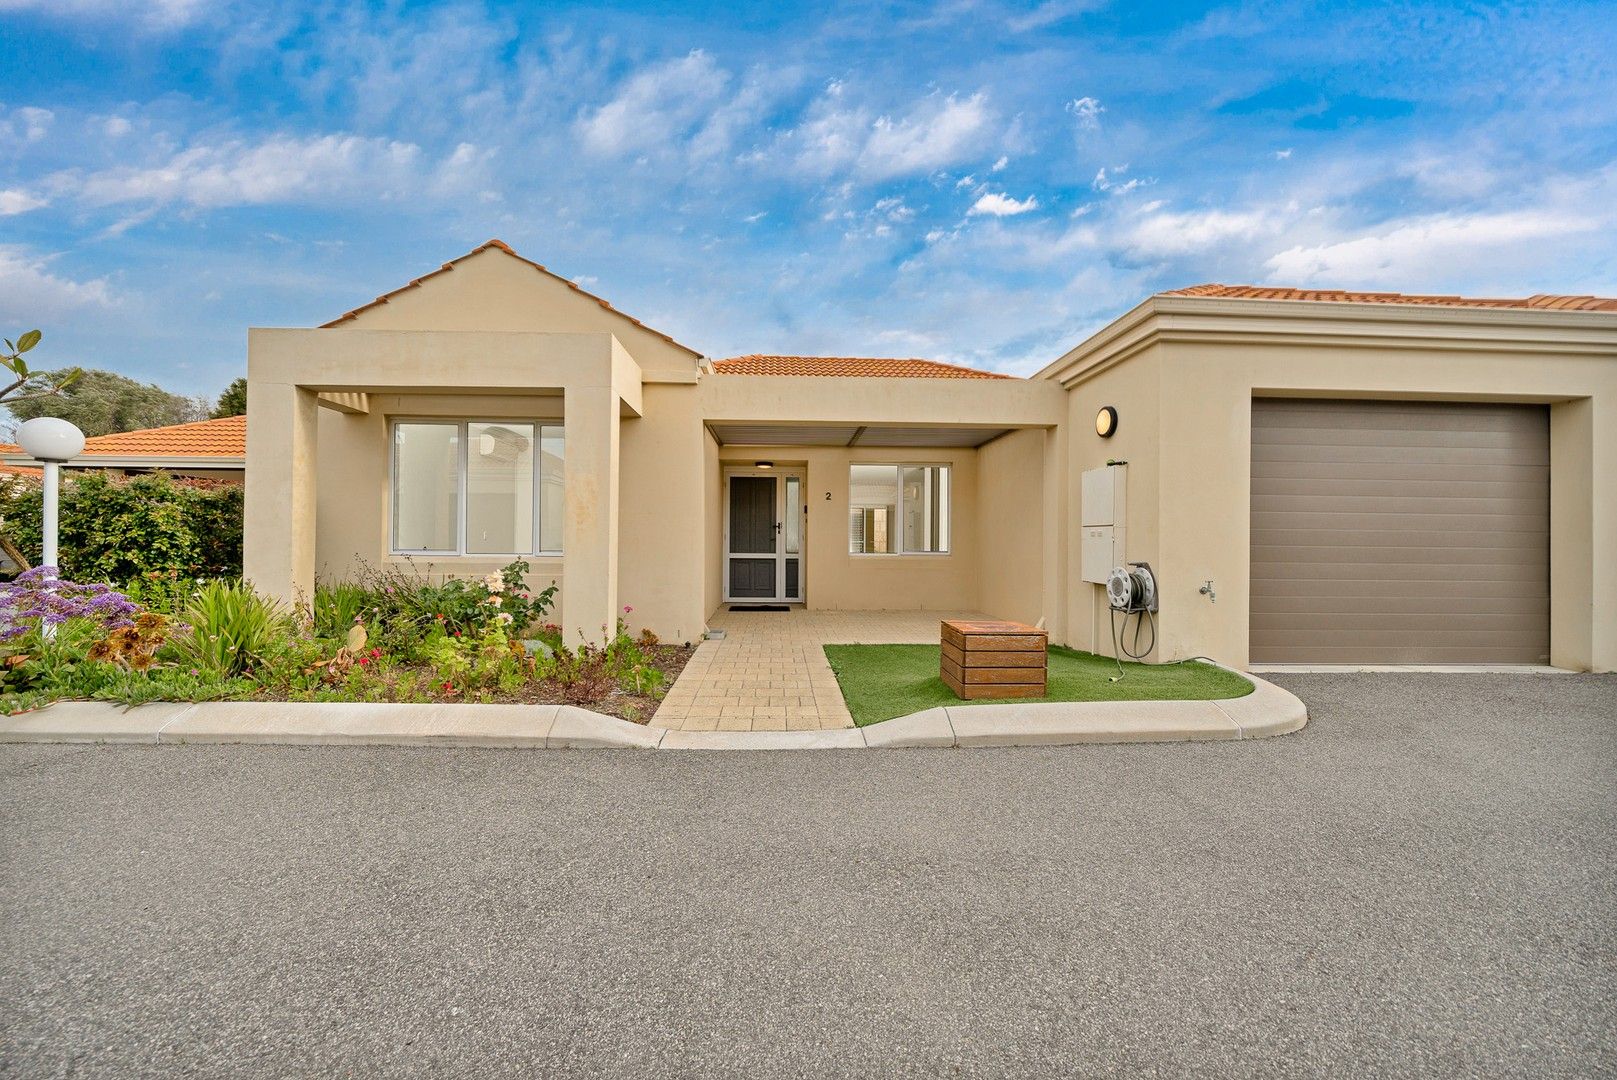 3 bedrooms House in 2/27 Gorham Way SPEARWOOD WA, 6163